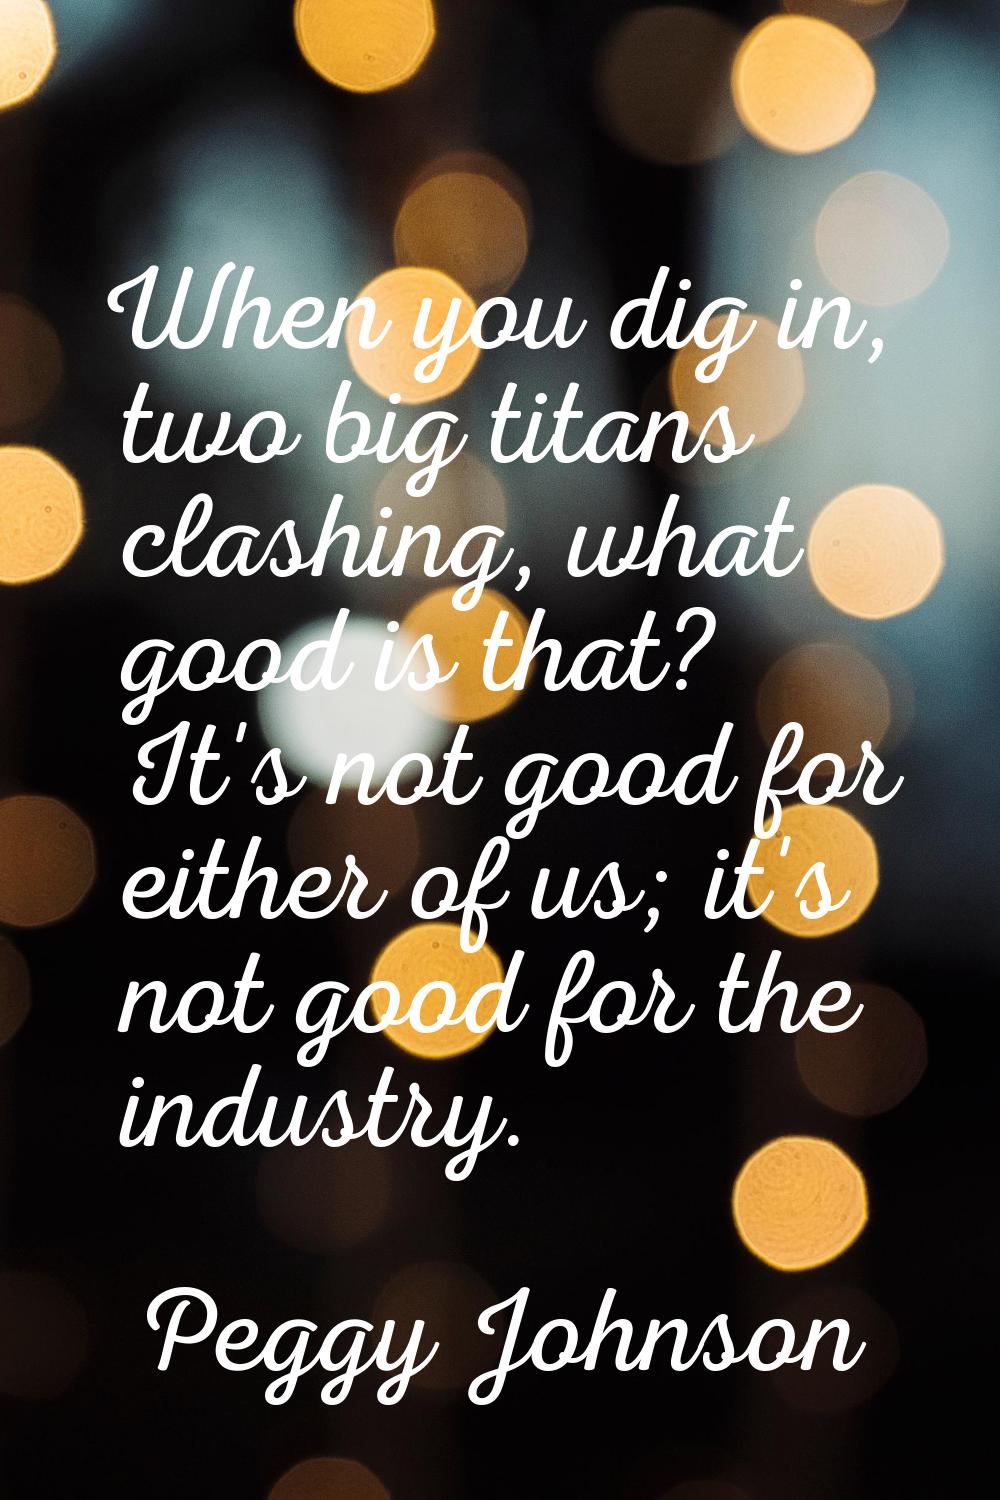 When you dig in, two big titans clashing, what good is that? It's not good for either of us; it's n